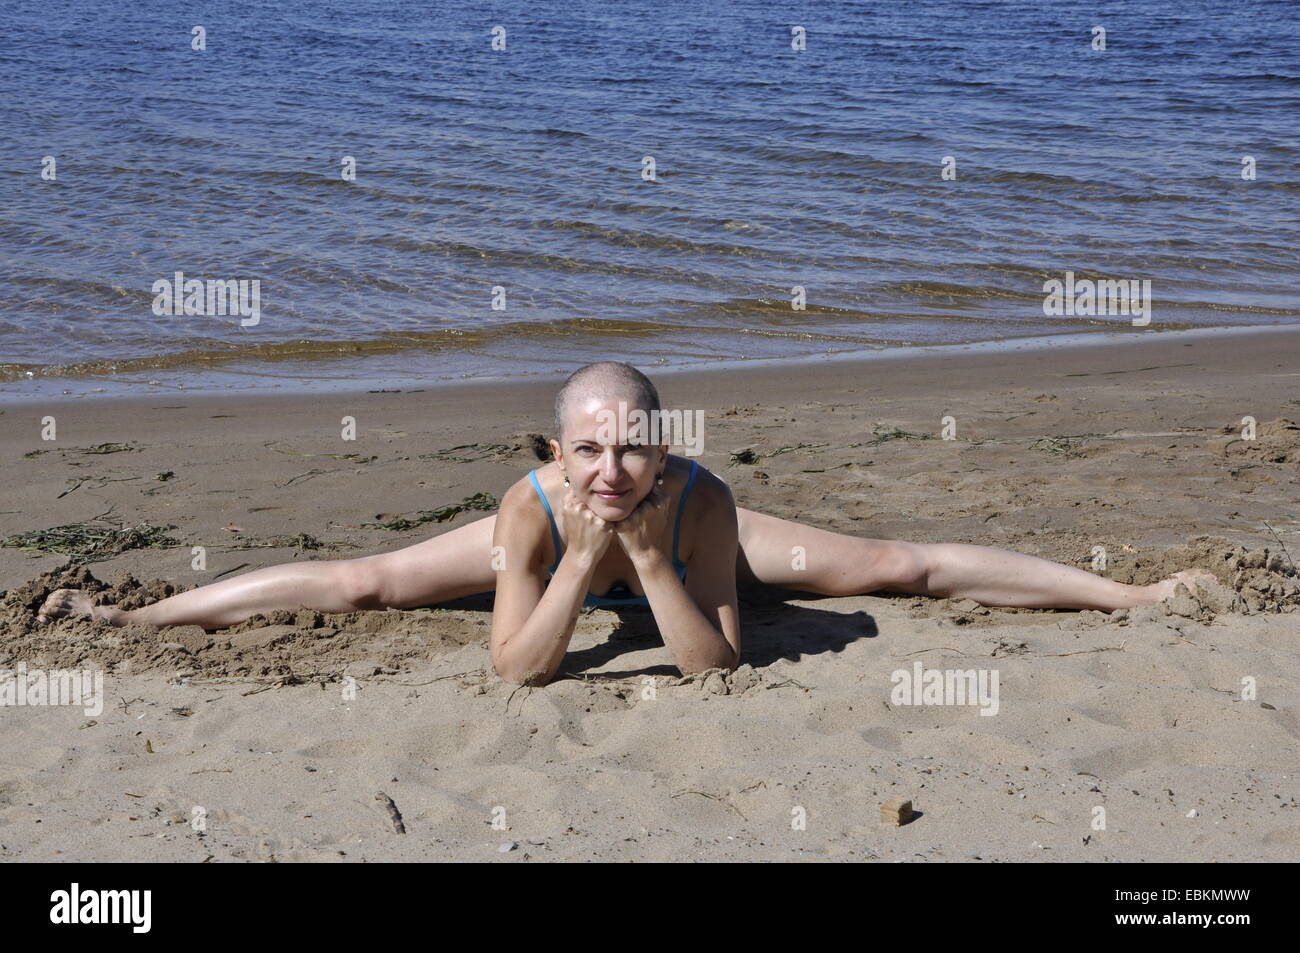 Bald woman sitting in split leaning on her elbows on a sandy river beach, smiling Stock Photo